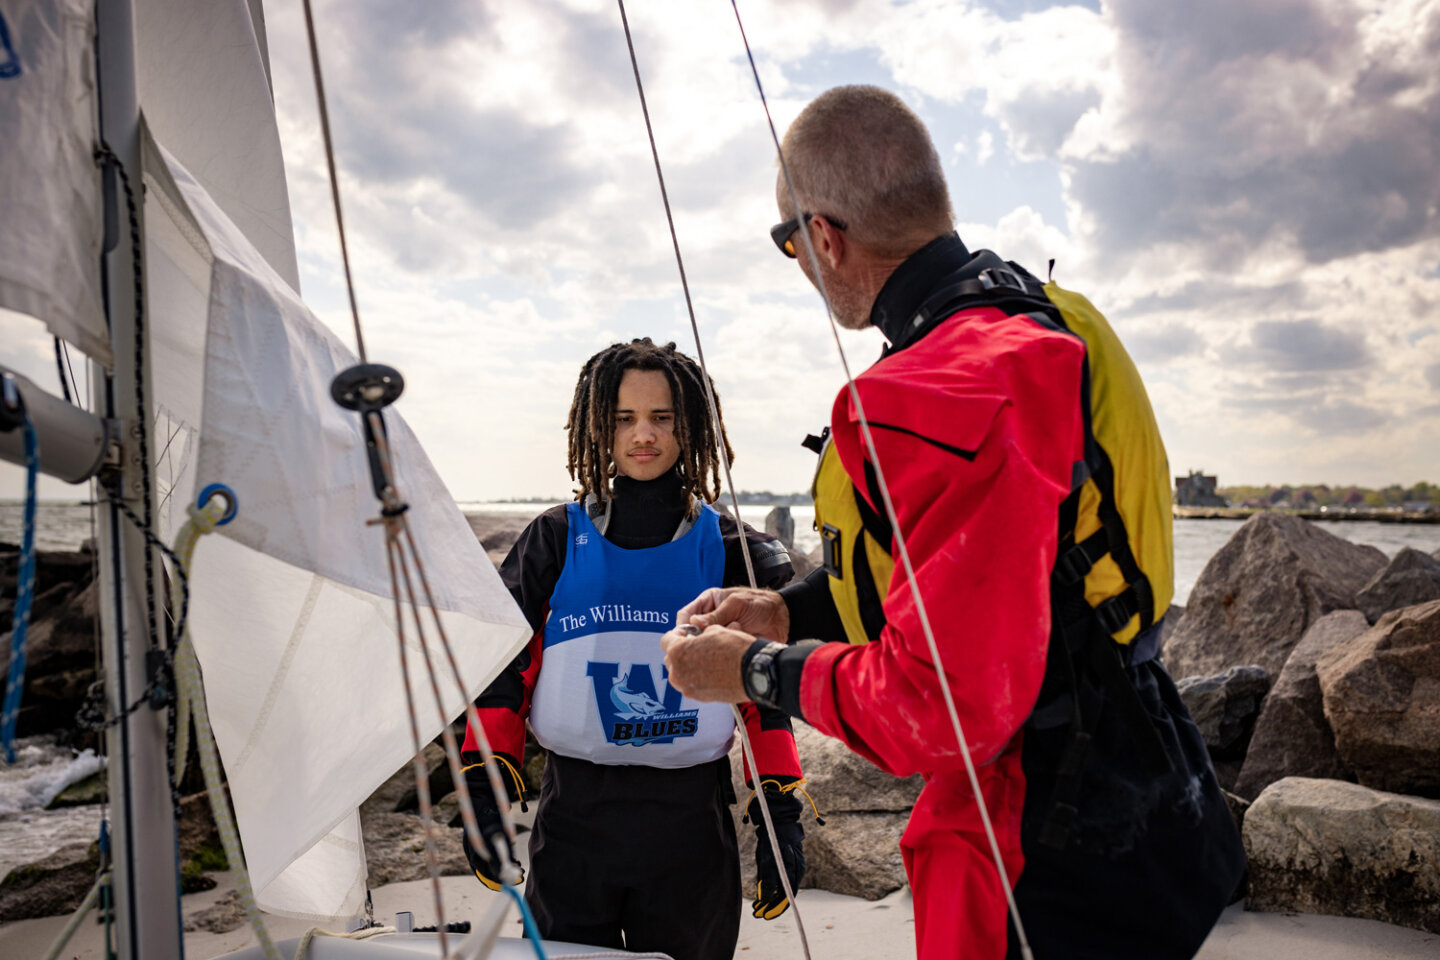 Williams school sailing student talks to sailing coach in full sailing gear next to their sailboat